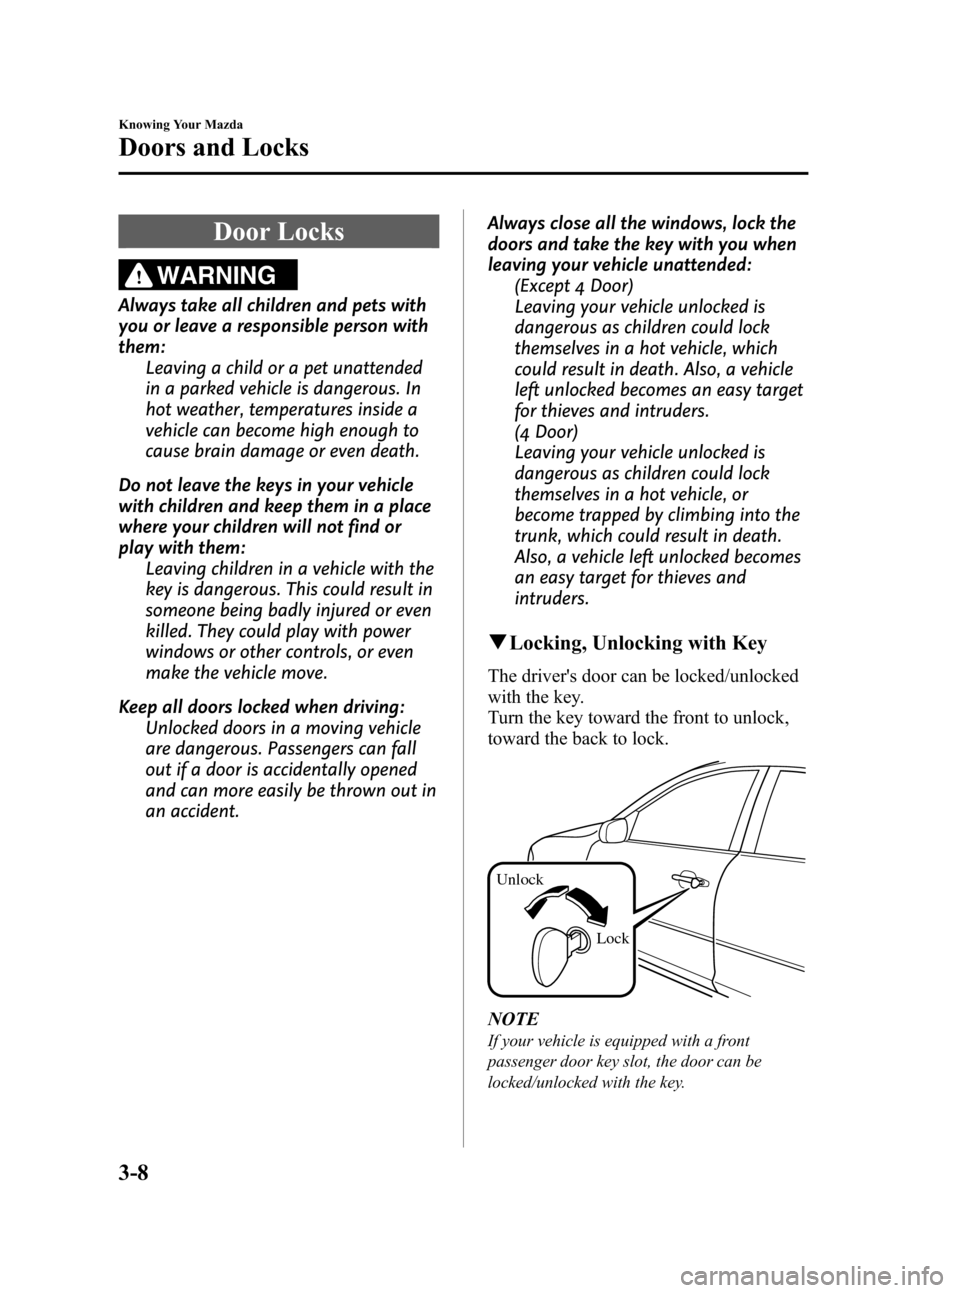 MAZDA MODEL 3 HATCHBACK 2008   (in English) Manual PDF Black plate (80,1)
Door Locks
WARNING
Always take all children and pets with
you or leave a responsible person with
them:
Leaving a child or a pet unattended
in a parked vehicle is dangerous. In
hot w